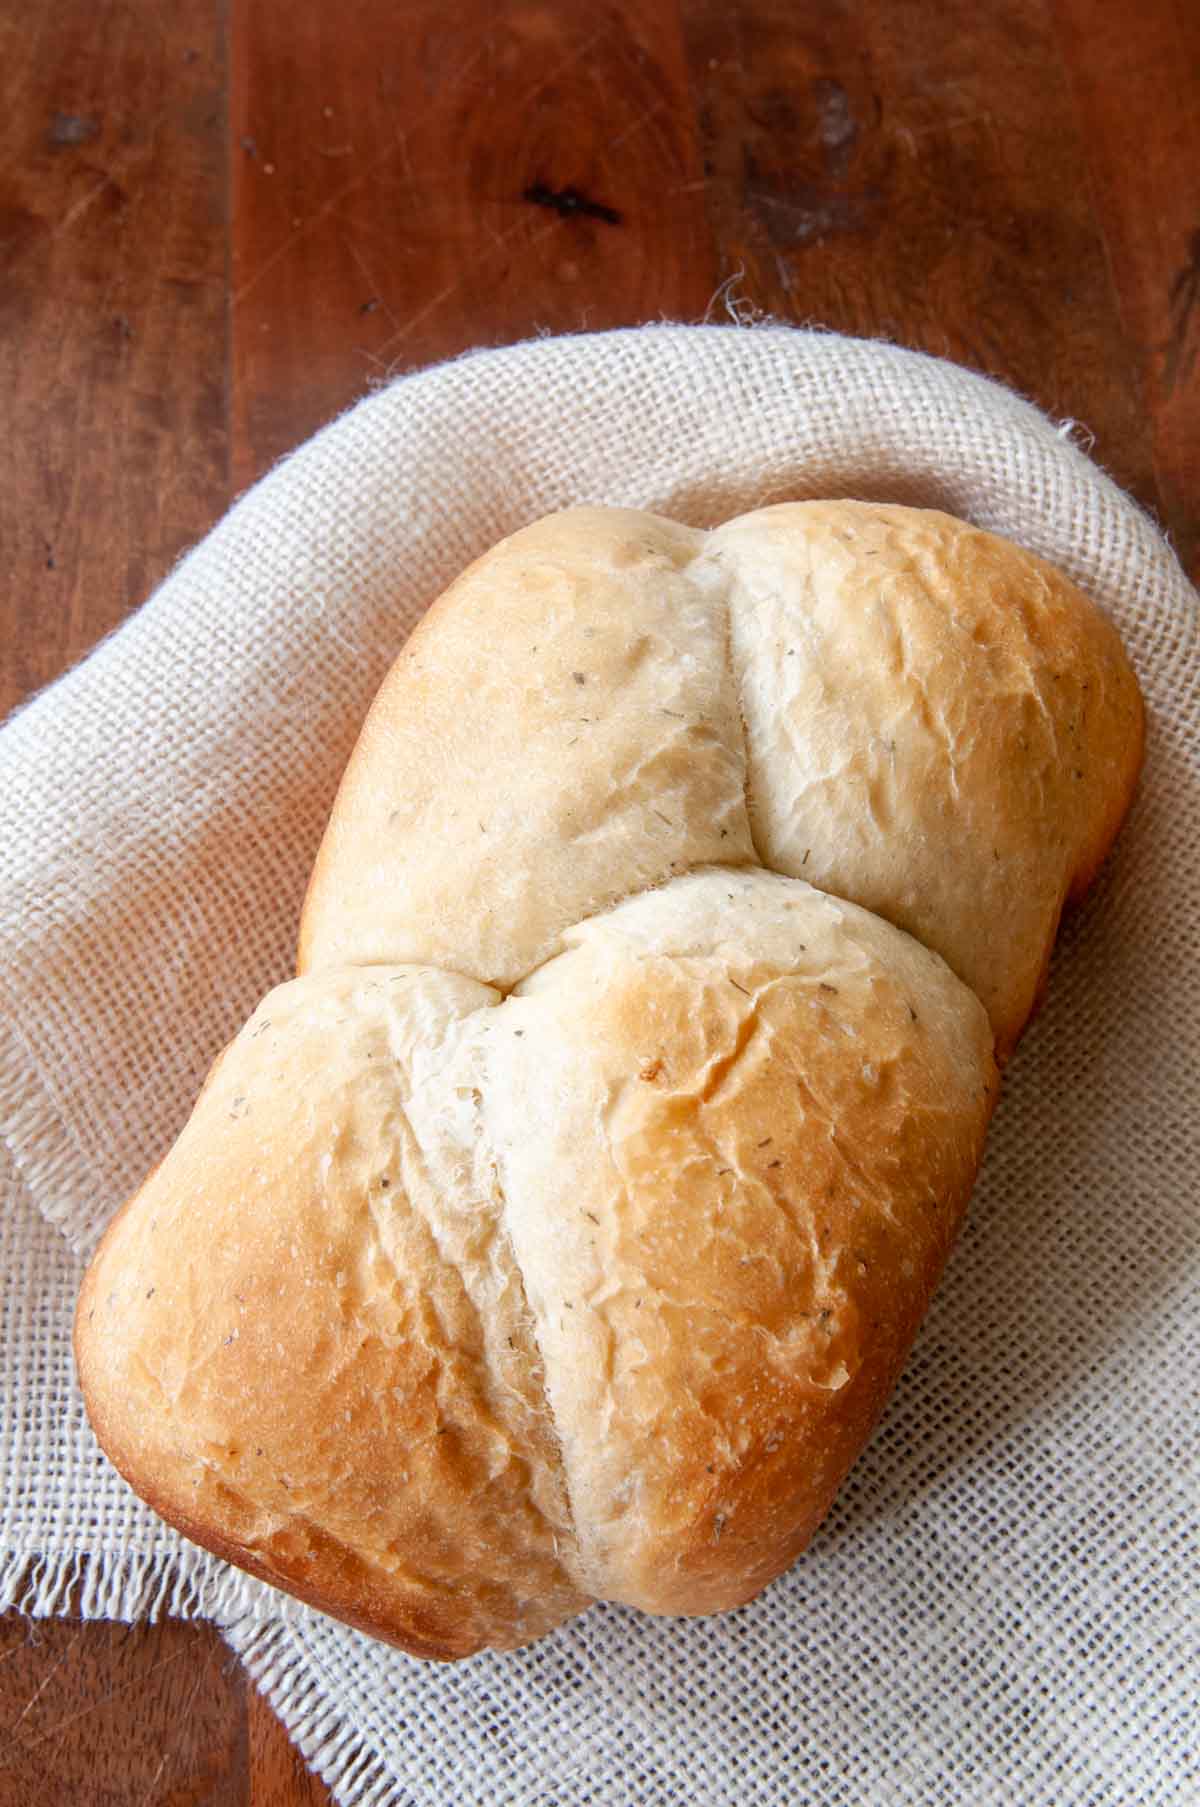 Which bread is a type of Italian bread that is often used for garlic bread or bruschetta?